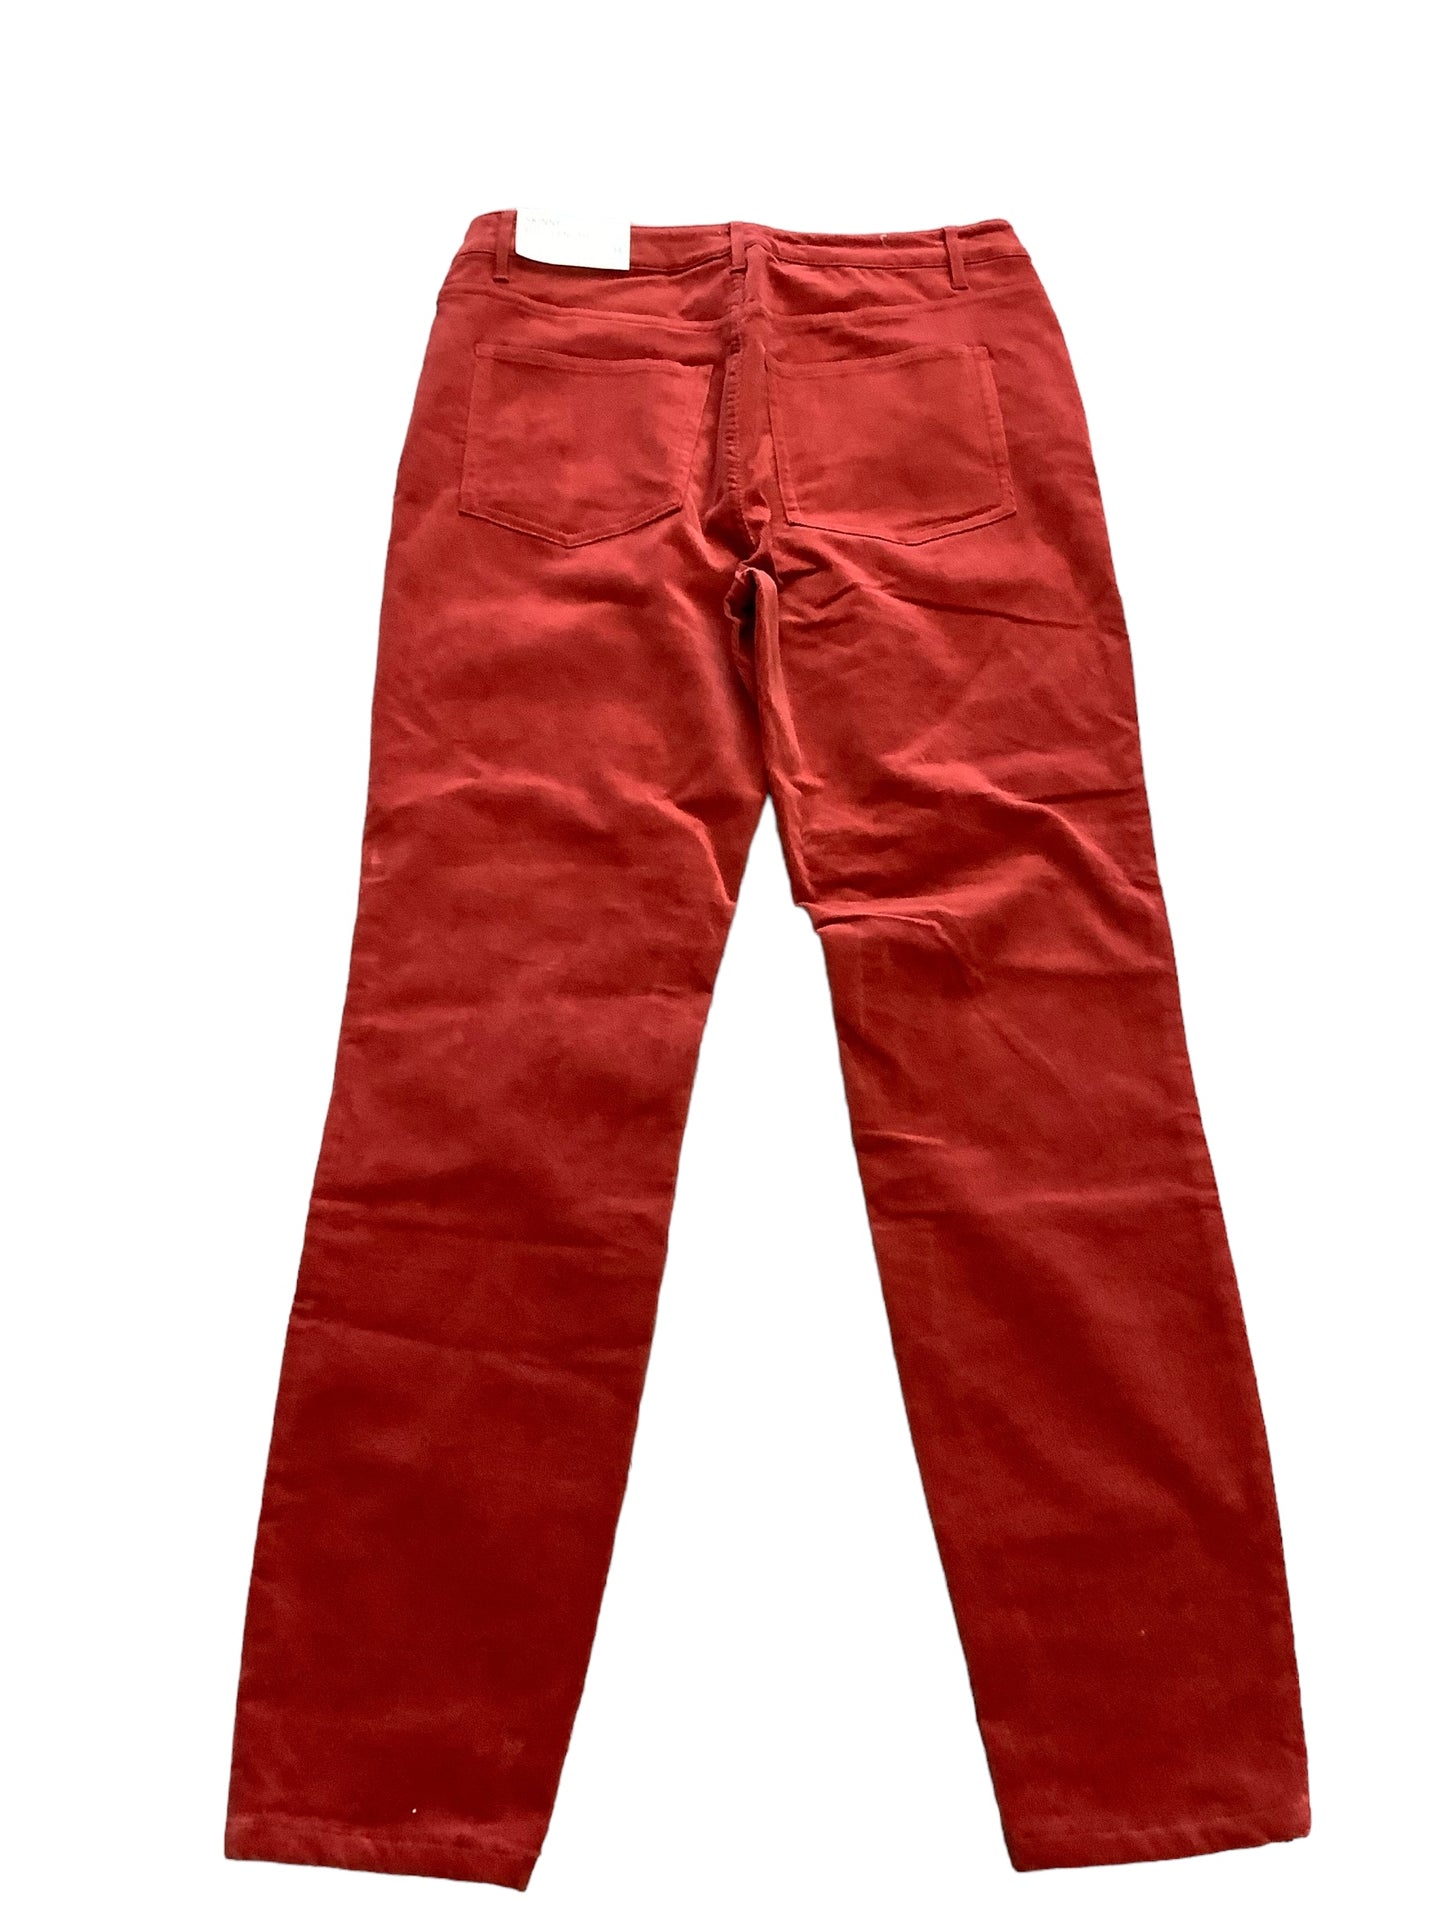 Pants Corduroy By Soft Surroundings  Size: 8